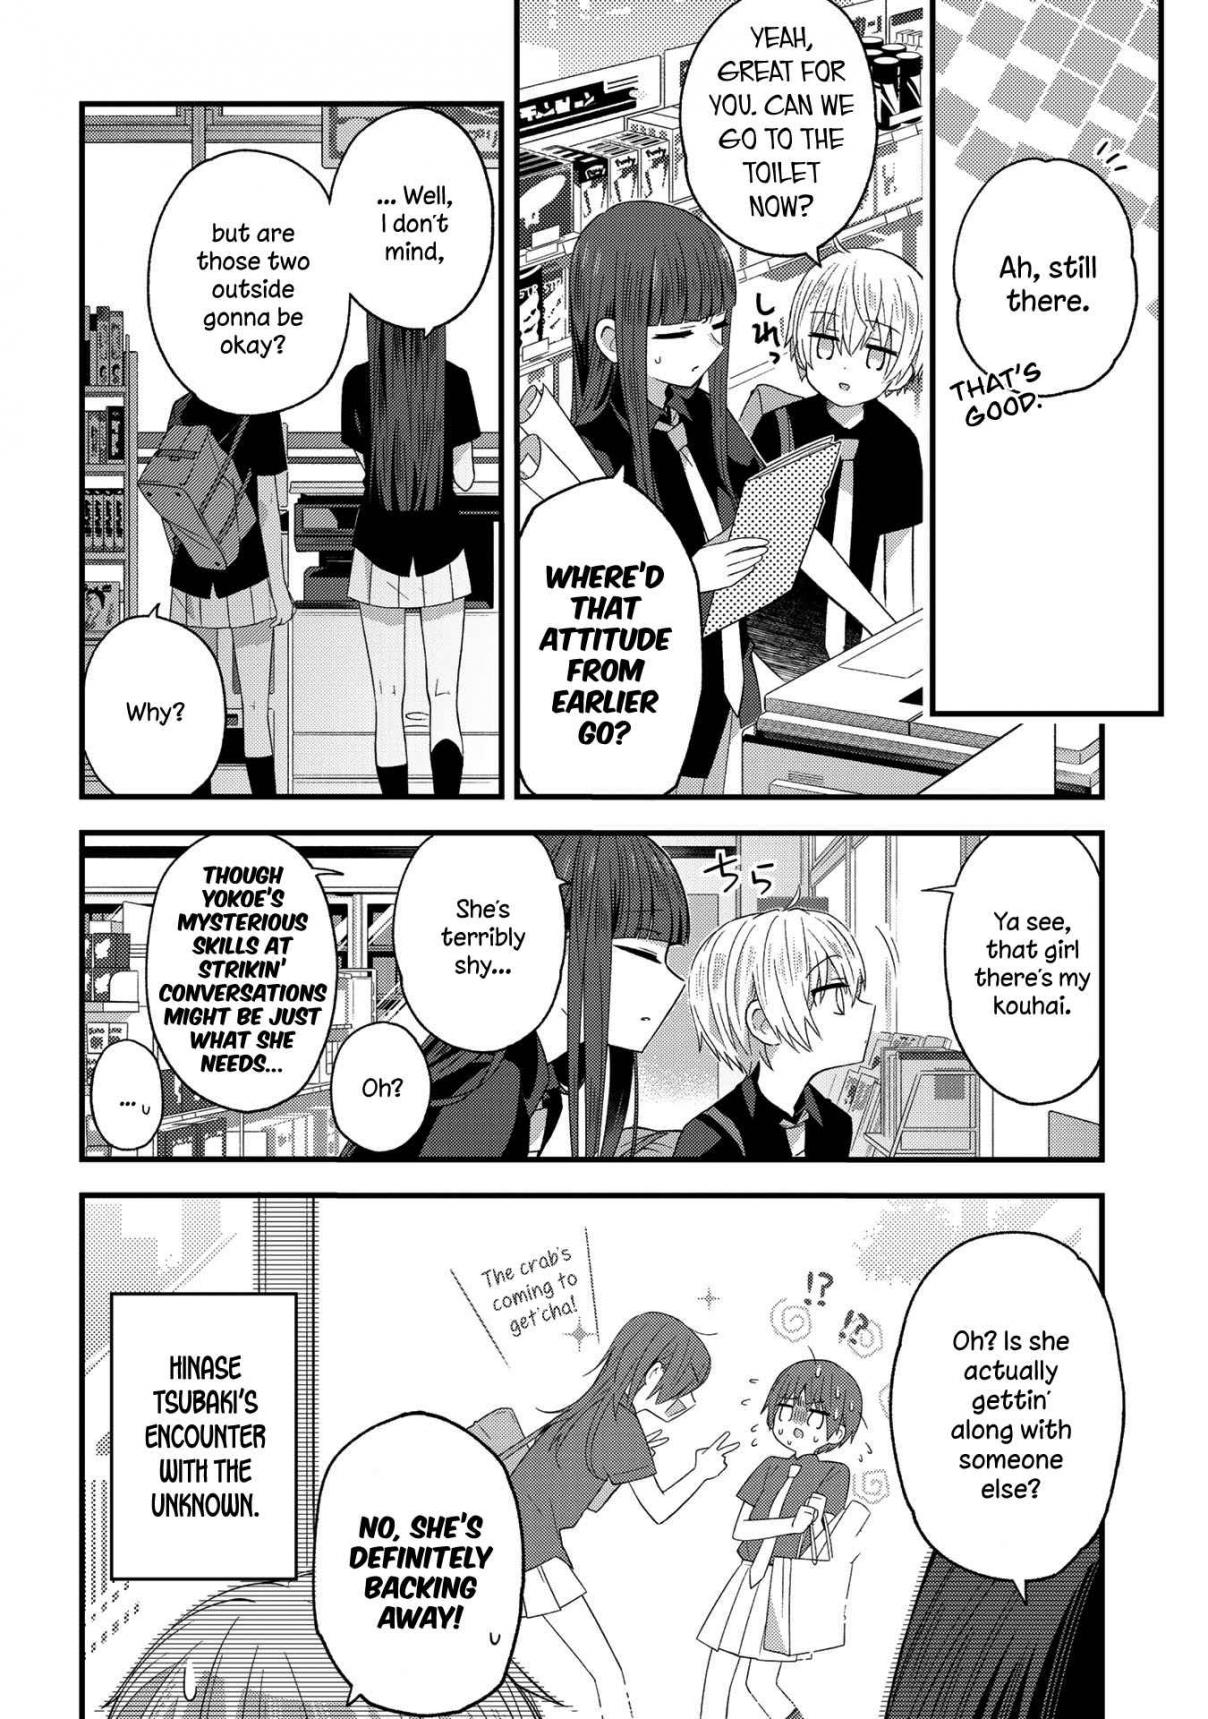 School Zone Vol. 1 Ch. 21 Mysterious skills are what she needs.